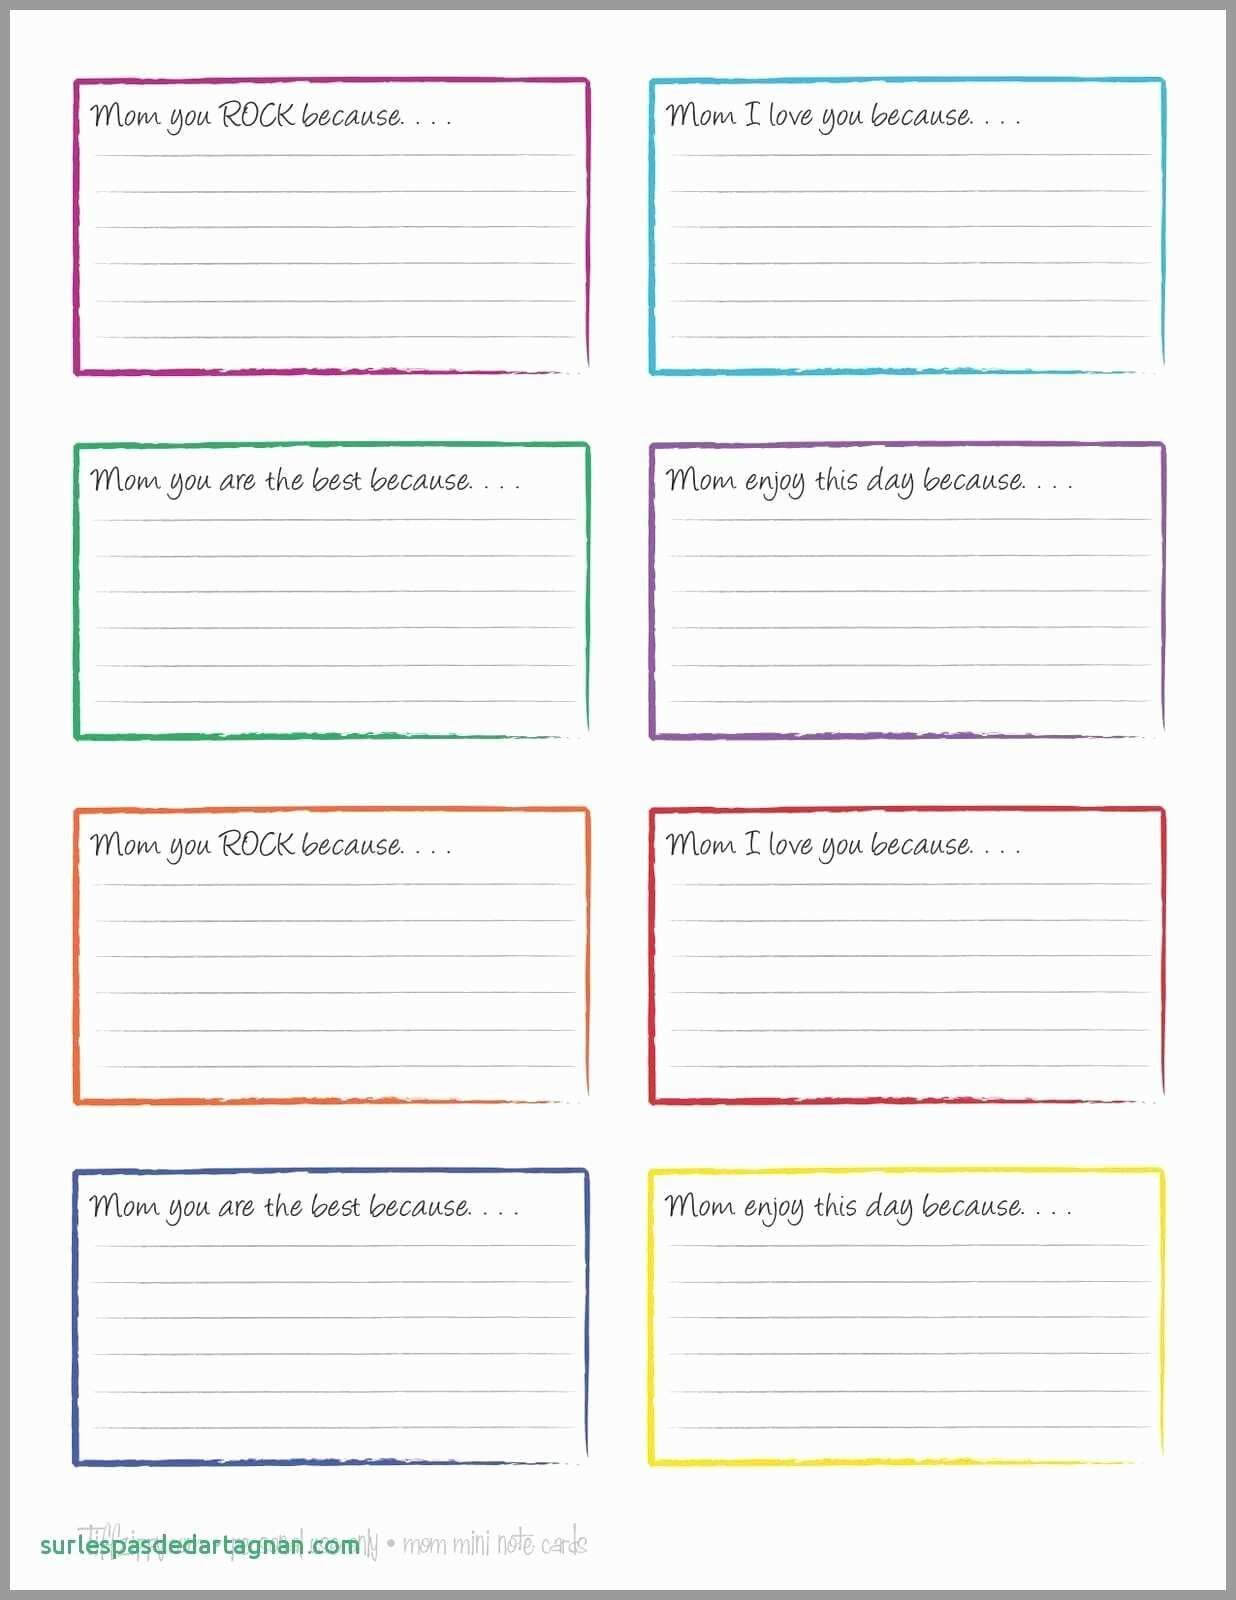 4X6 Note Card Template Google Docs Intended For Word Template For 3X5 Index Cards